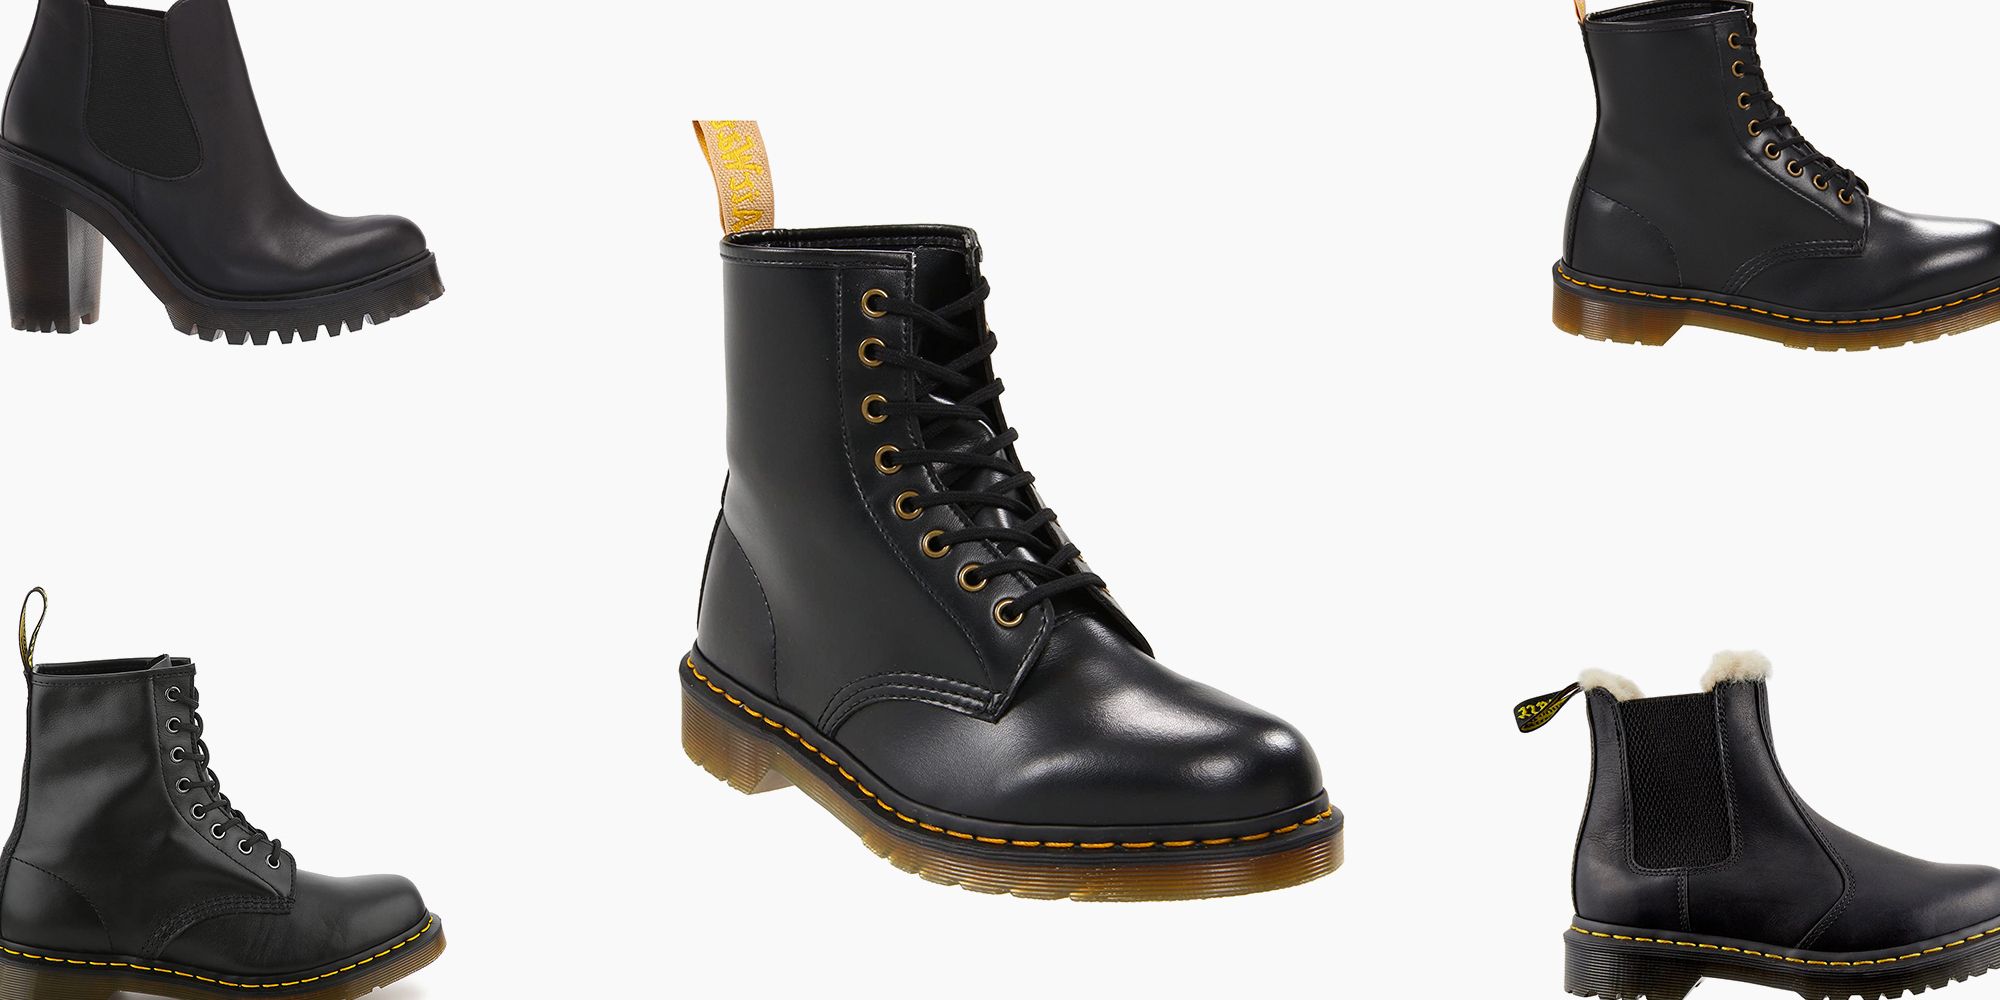 Dr. Martens Black Boots Are On Sale On 